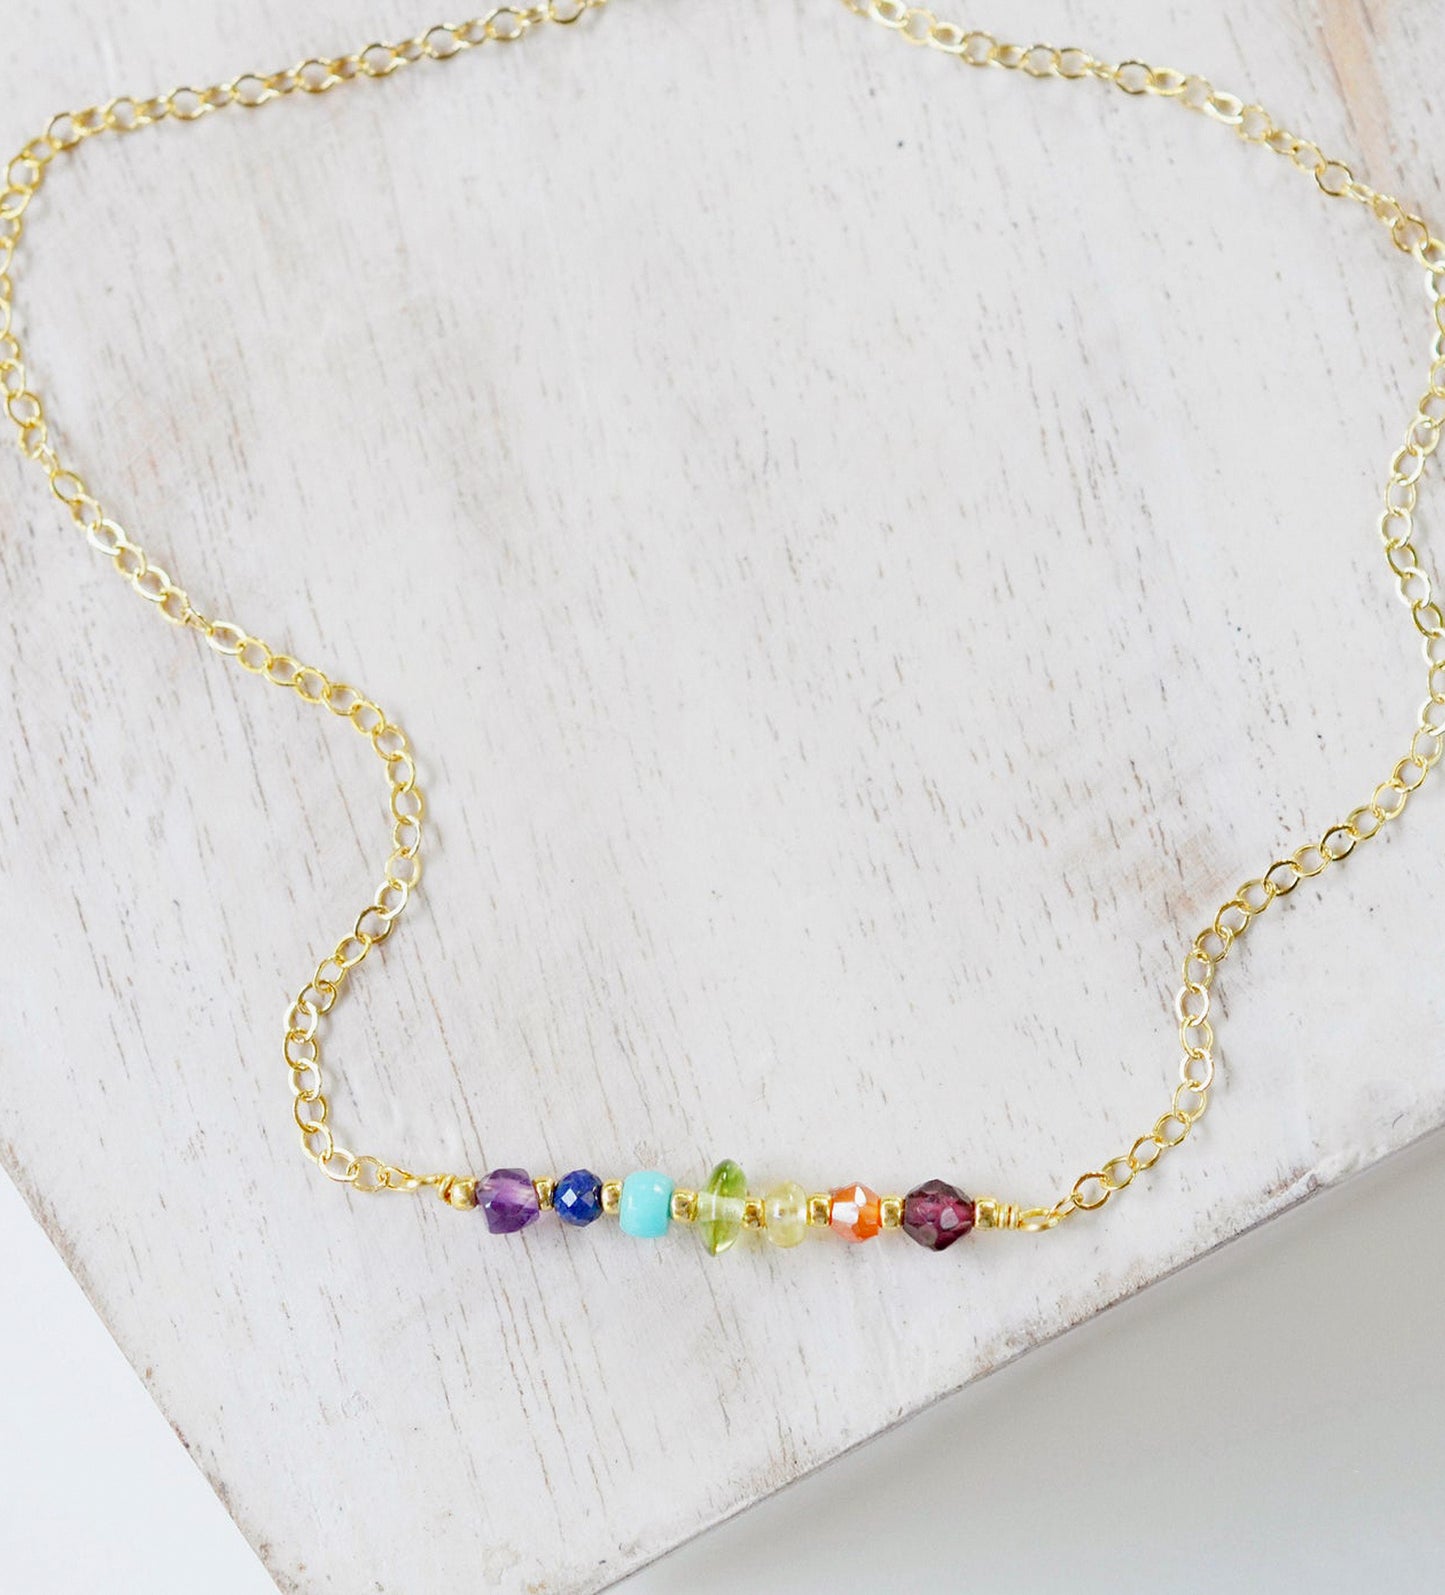 Rainbow Crystal Chakra Necklace, Sterling Silver or 14k Gold Filled